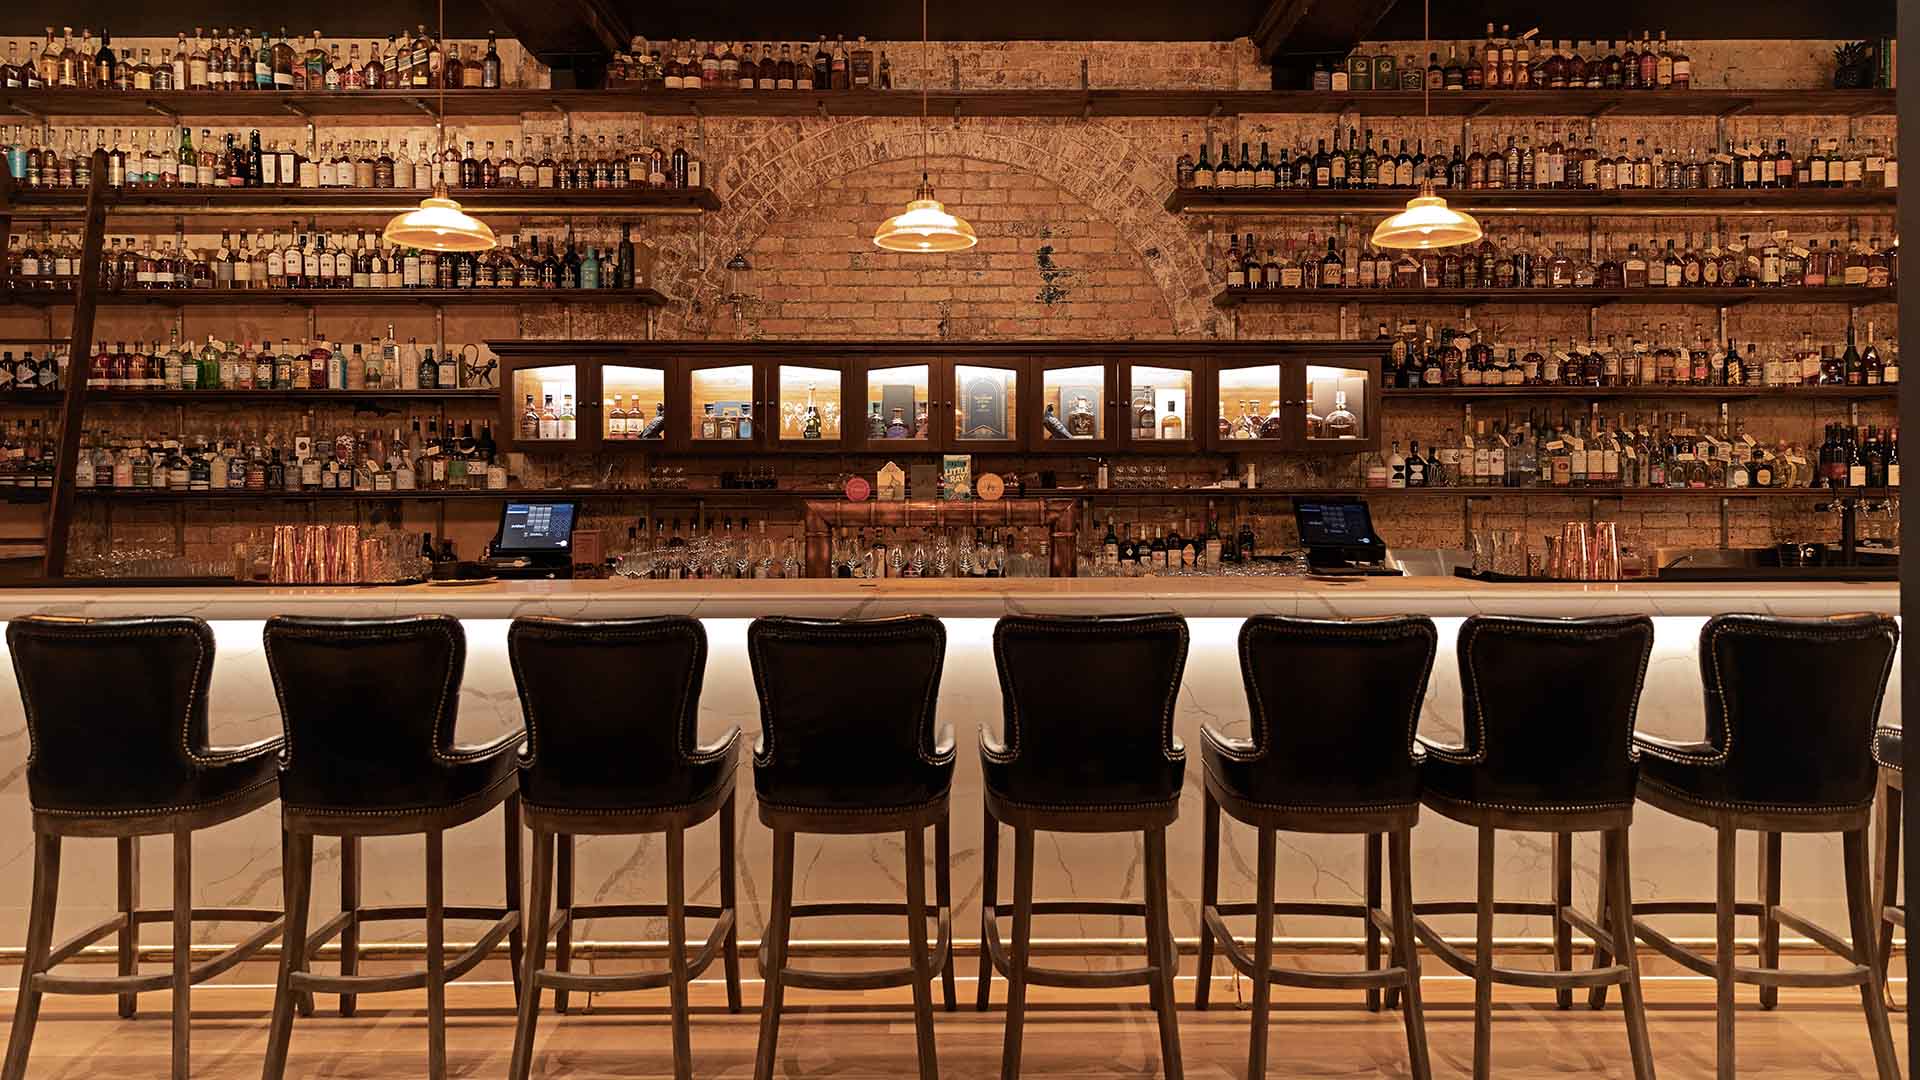 Dr Gimlette Is the CBD's Luxe New Cocktail Bar Inside the Heritage-Listed Old Metro Arts Theatre